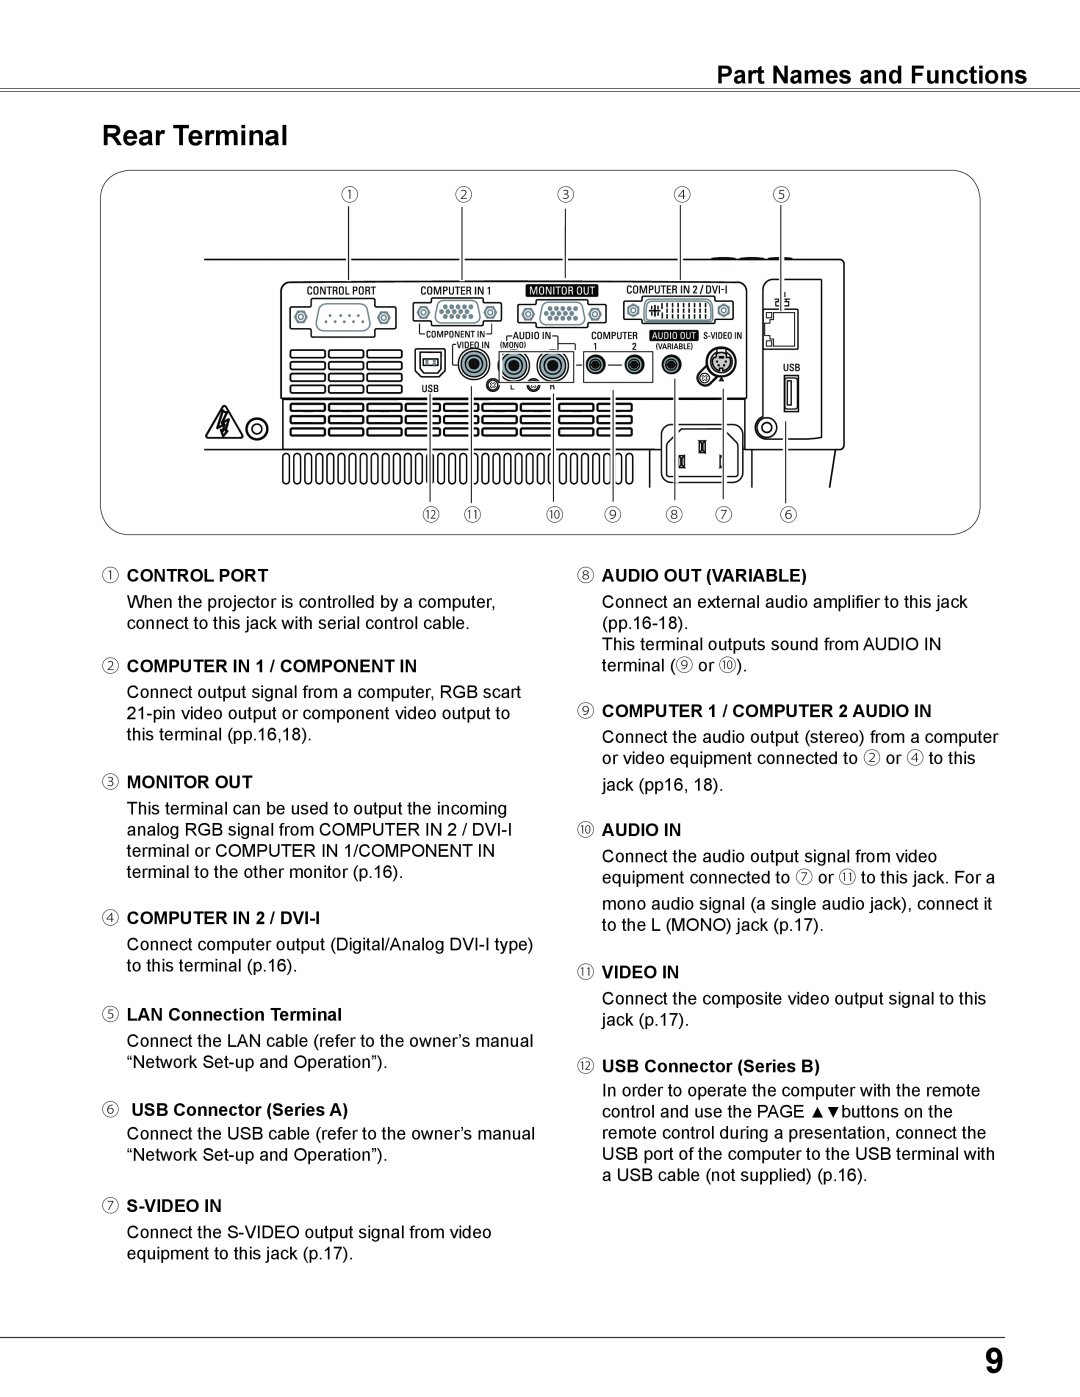 Sanyo PLC-XU305A Rear Terminal, Part Names and Functions, ① CONTROL PORT, ② COMPUTER IN 1 / COMPONENT IN, ③ MONITOR OUT 